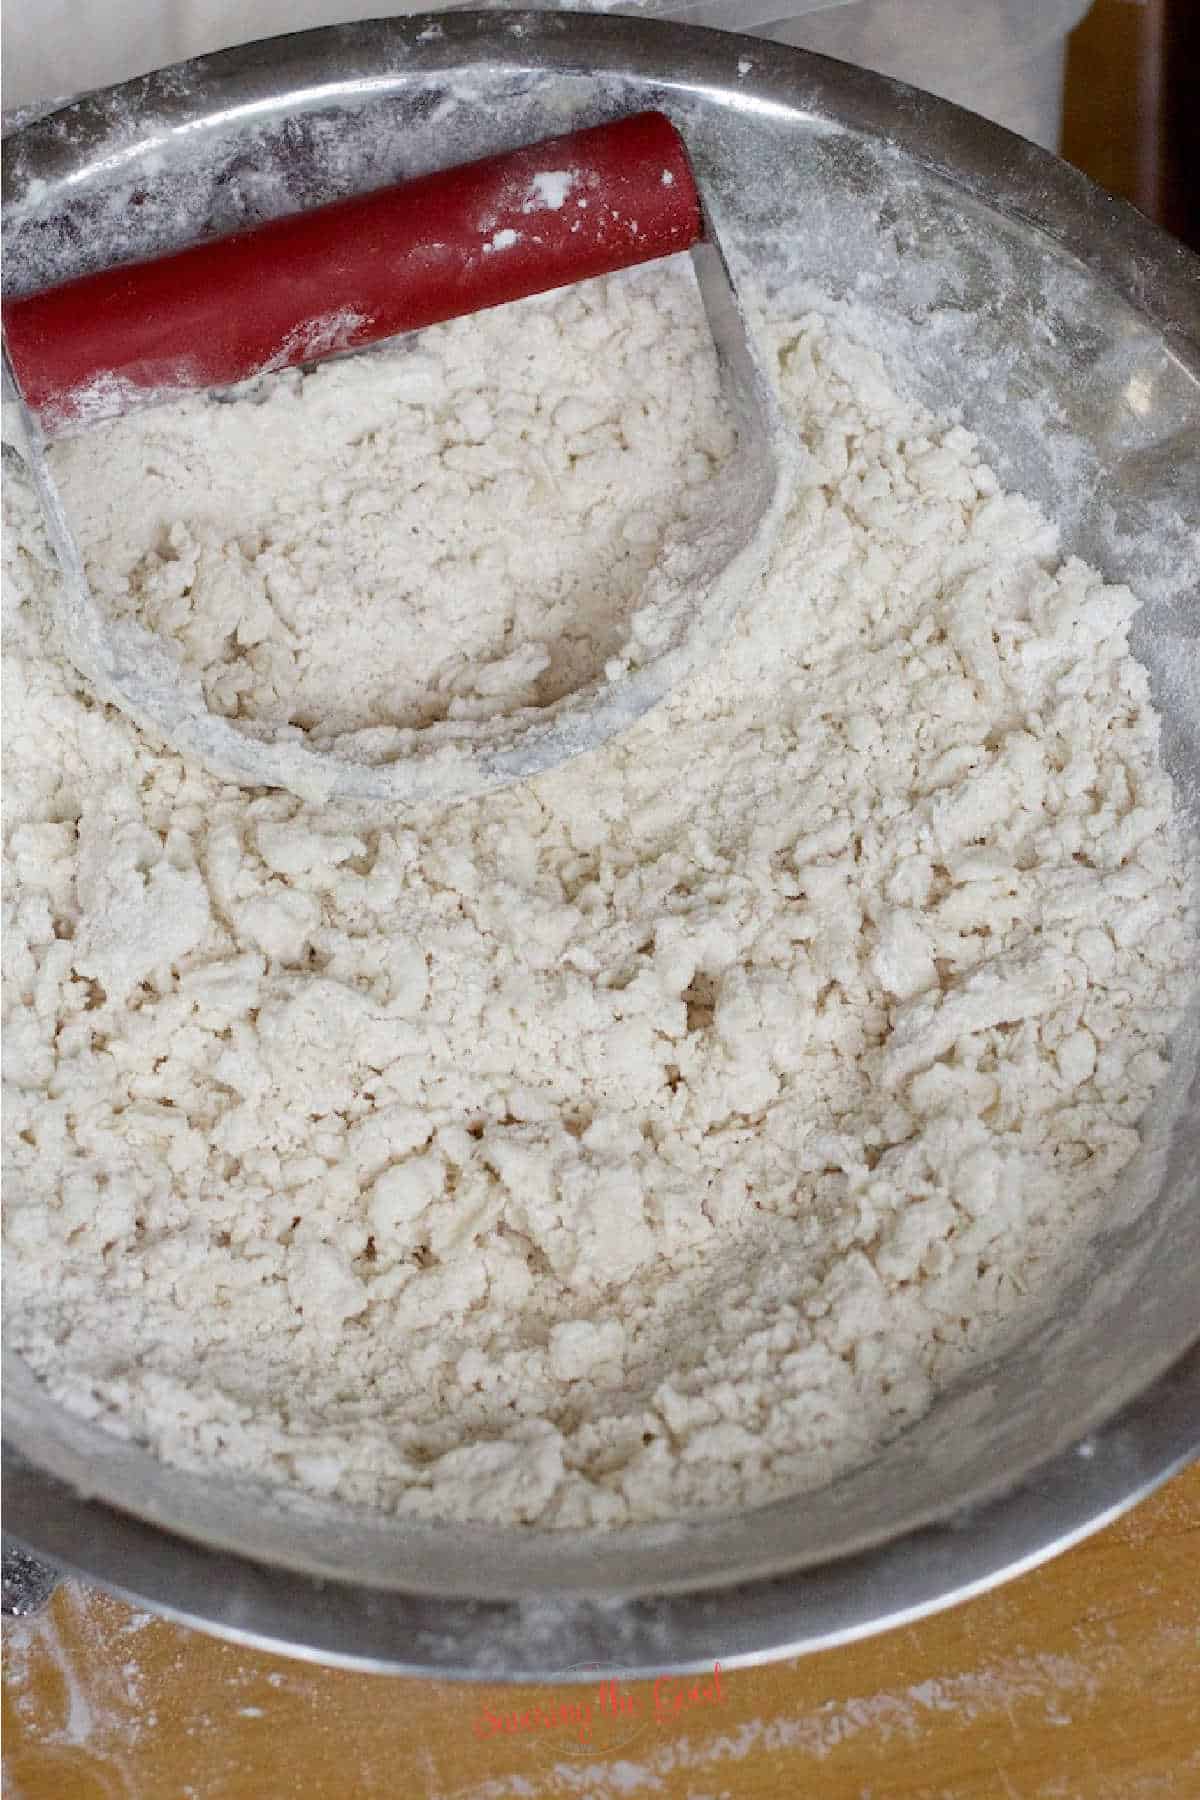 flour and crisco cut together for pie dough, pastry blender with red handle